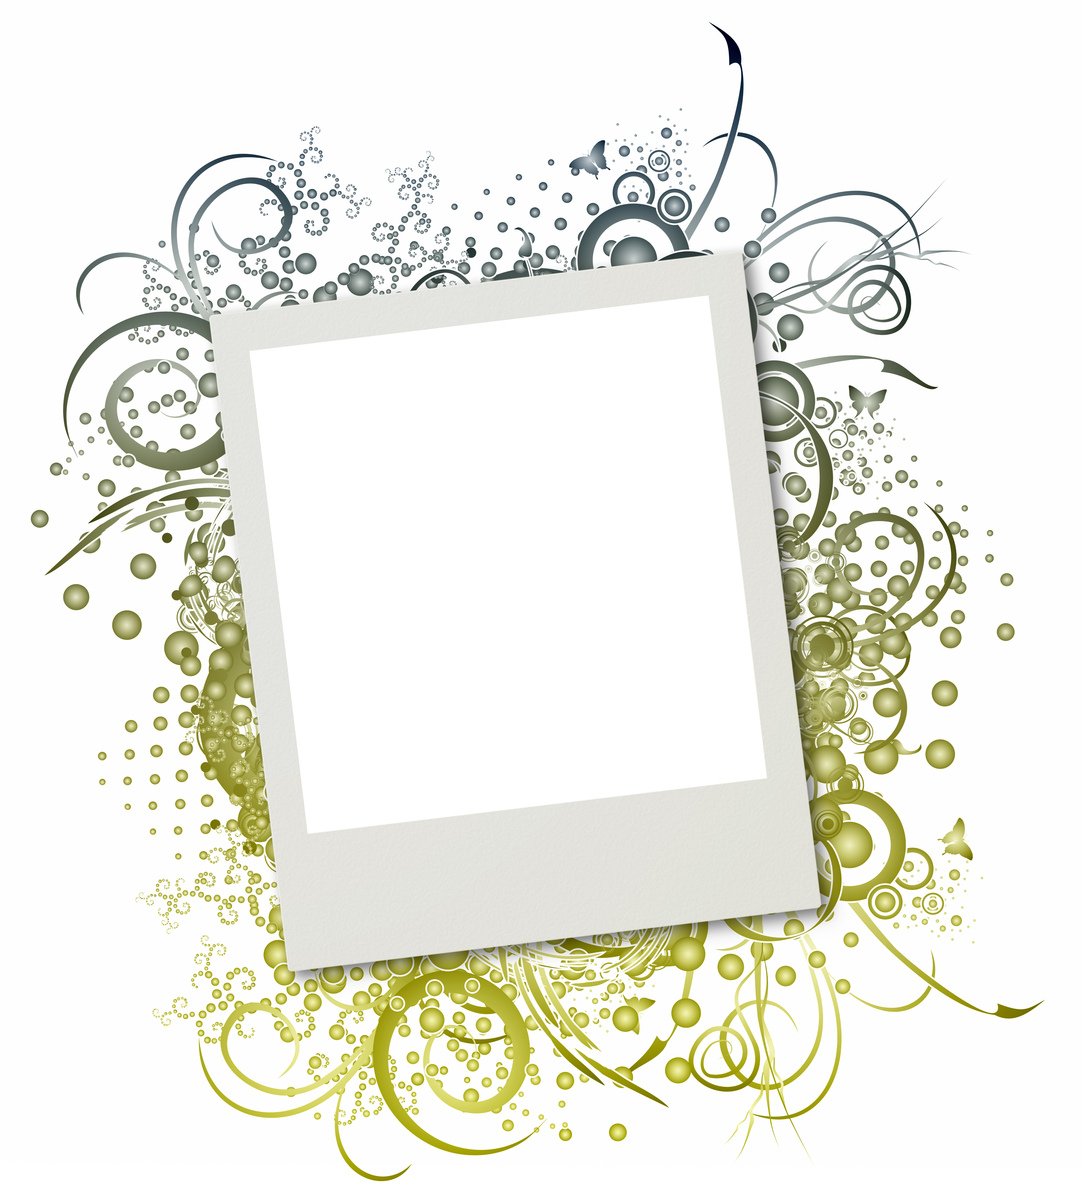 an abstract square frame is placed over a patterned background